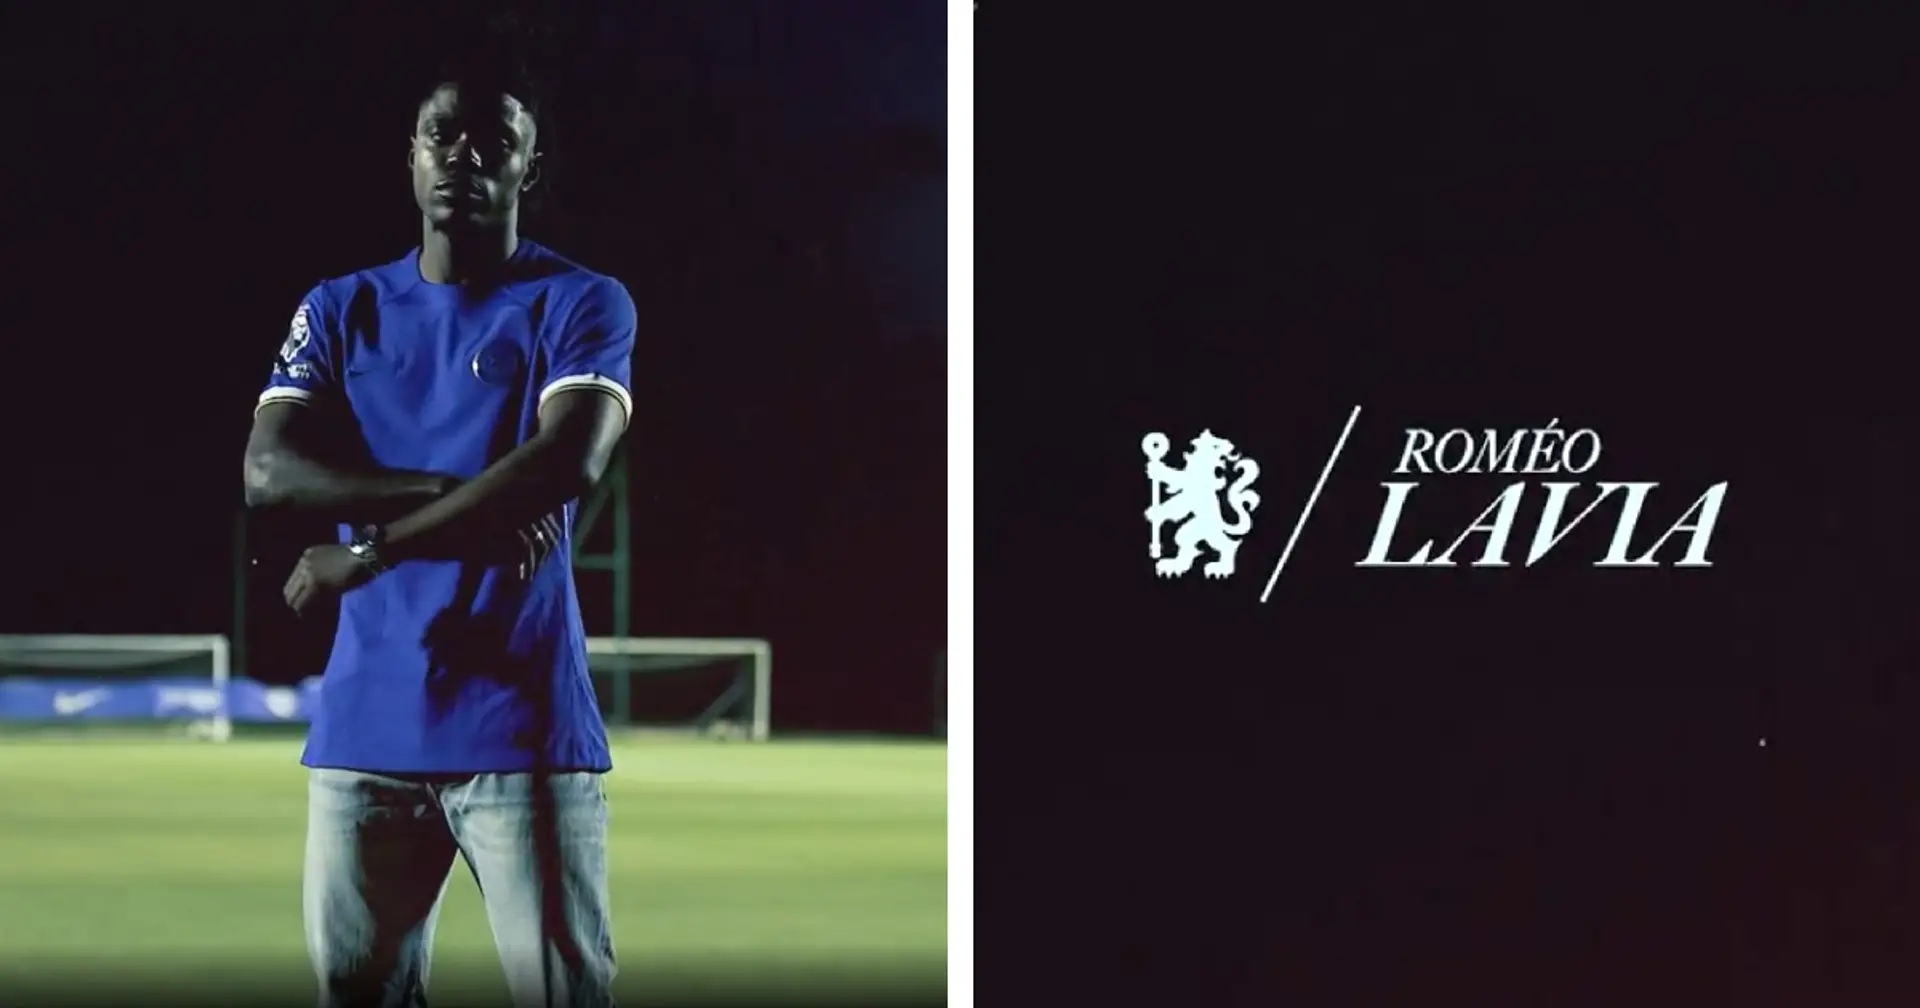 Romeo Lavia signs for Chelsea